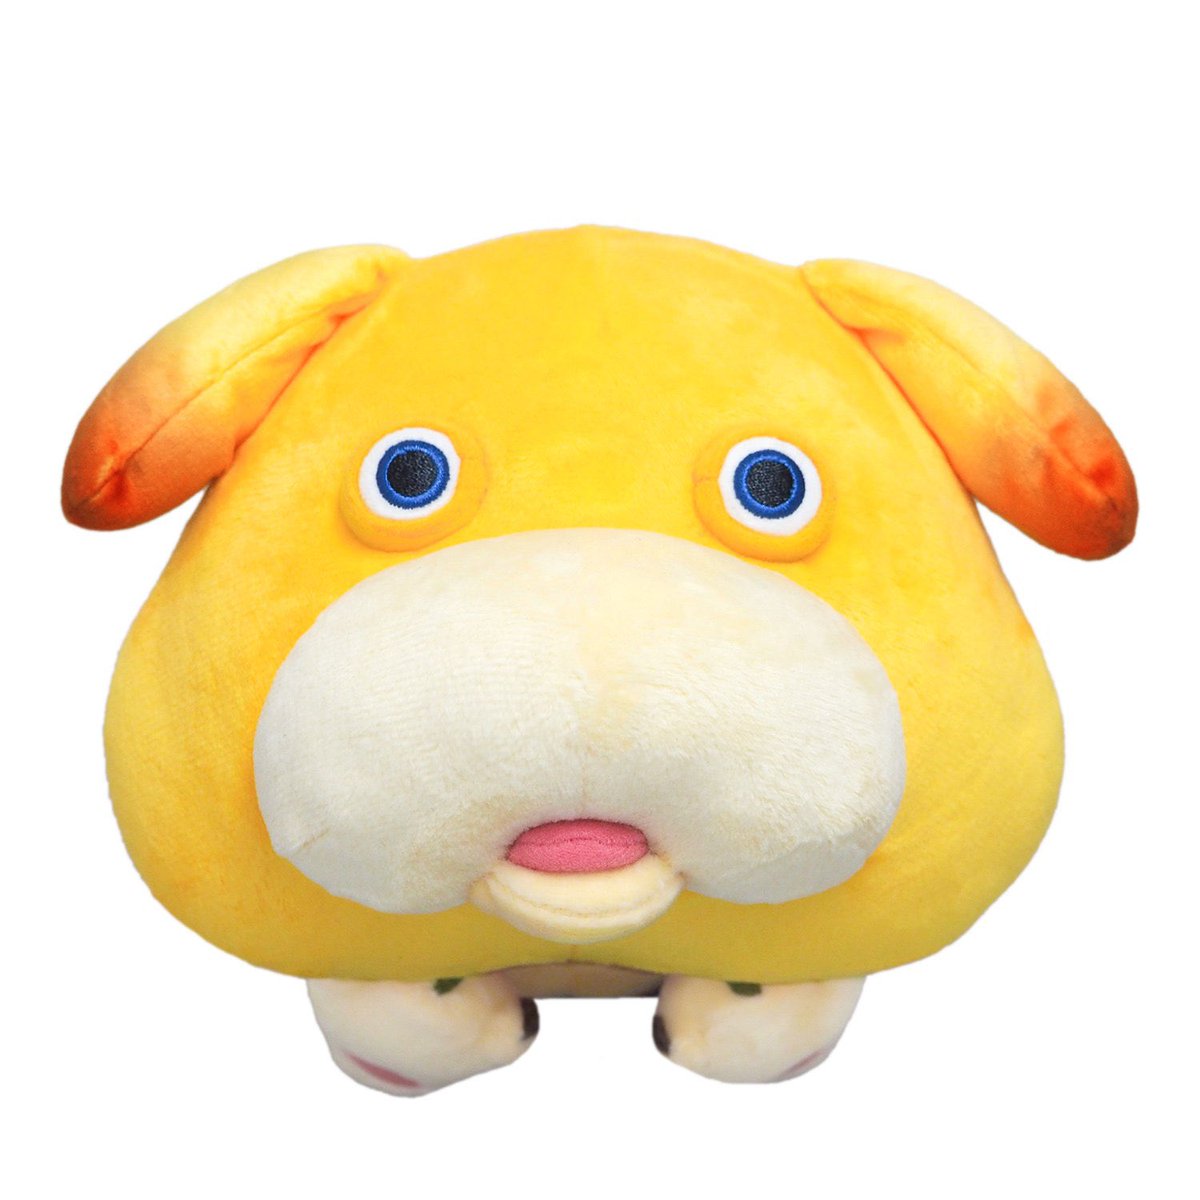 RT @VGPlushDaily: Today’s Video Game Plush of the Day is:

Oatchi from the Pikmin All Star Collection by San-ei https://t.co/fEKiLv0nLc